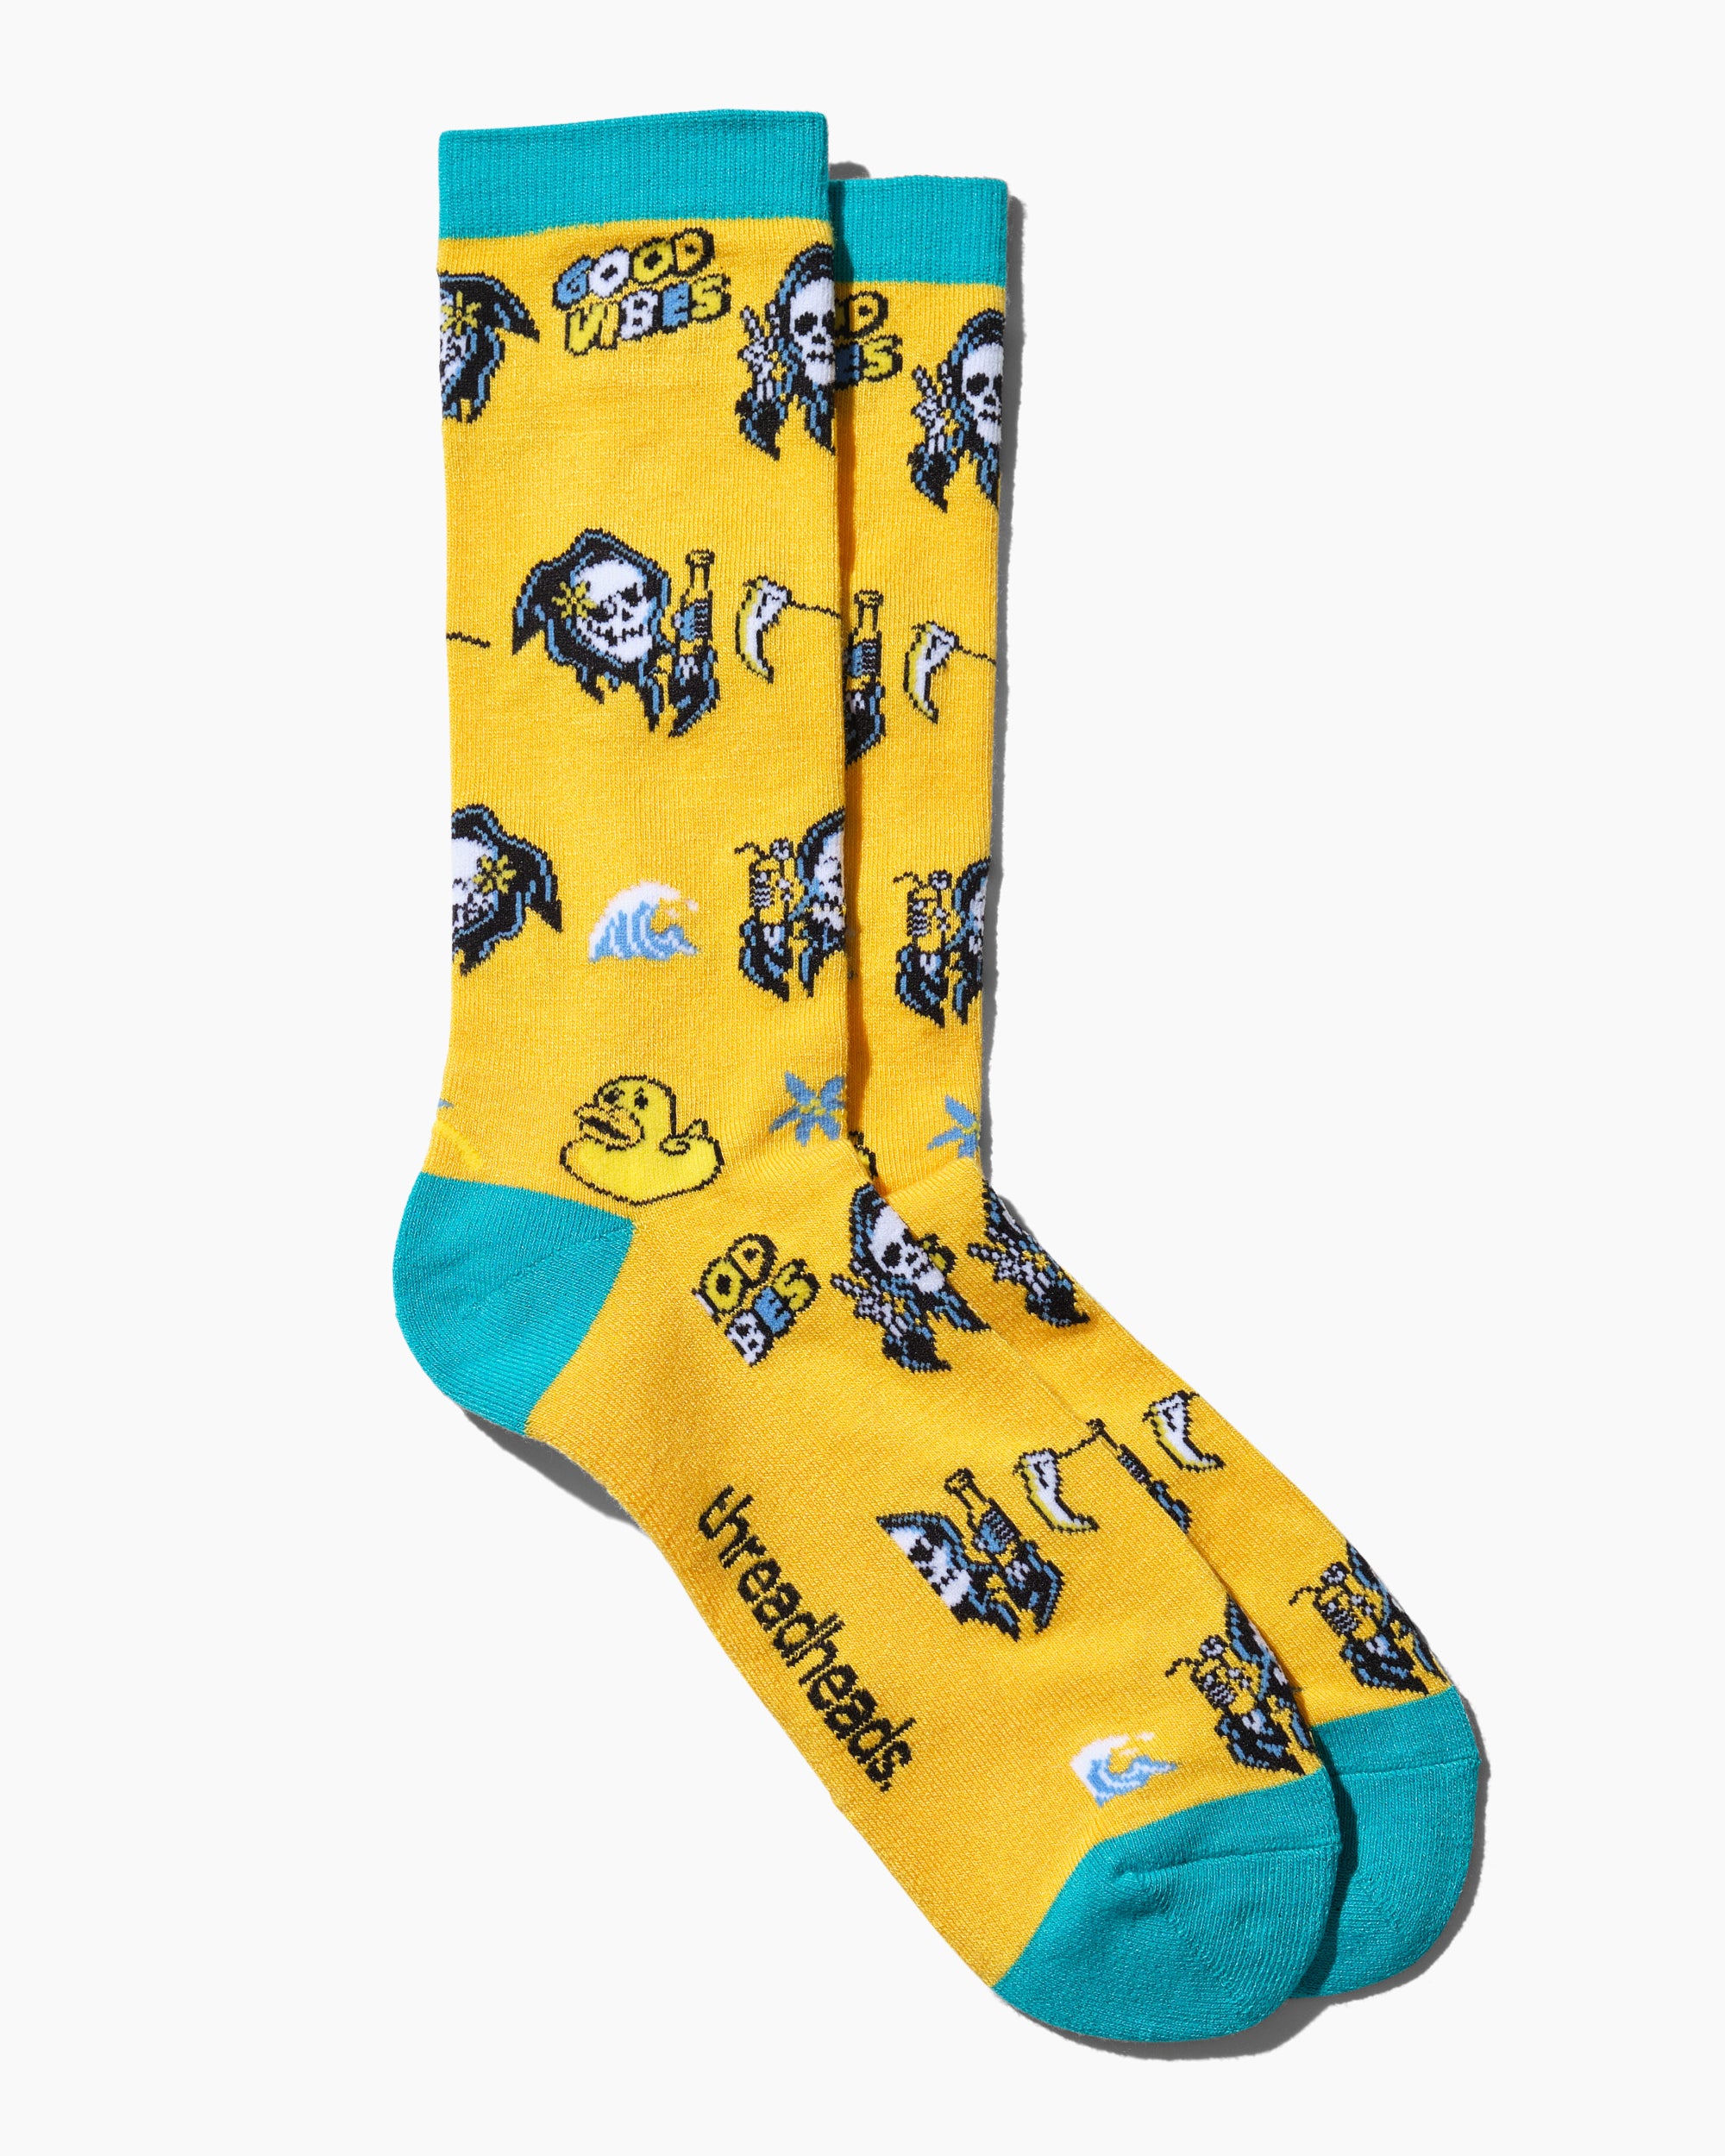 Rubber Ducky and The Reaper Socks